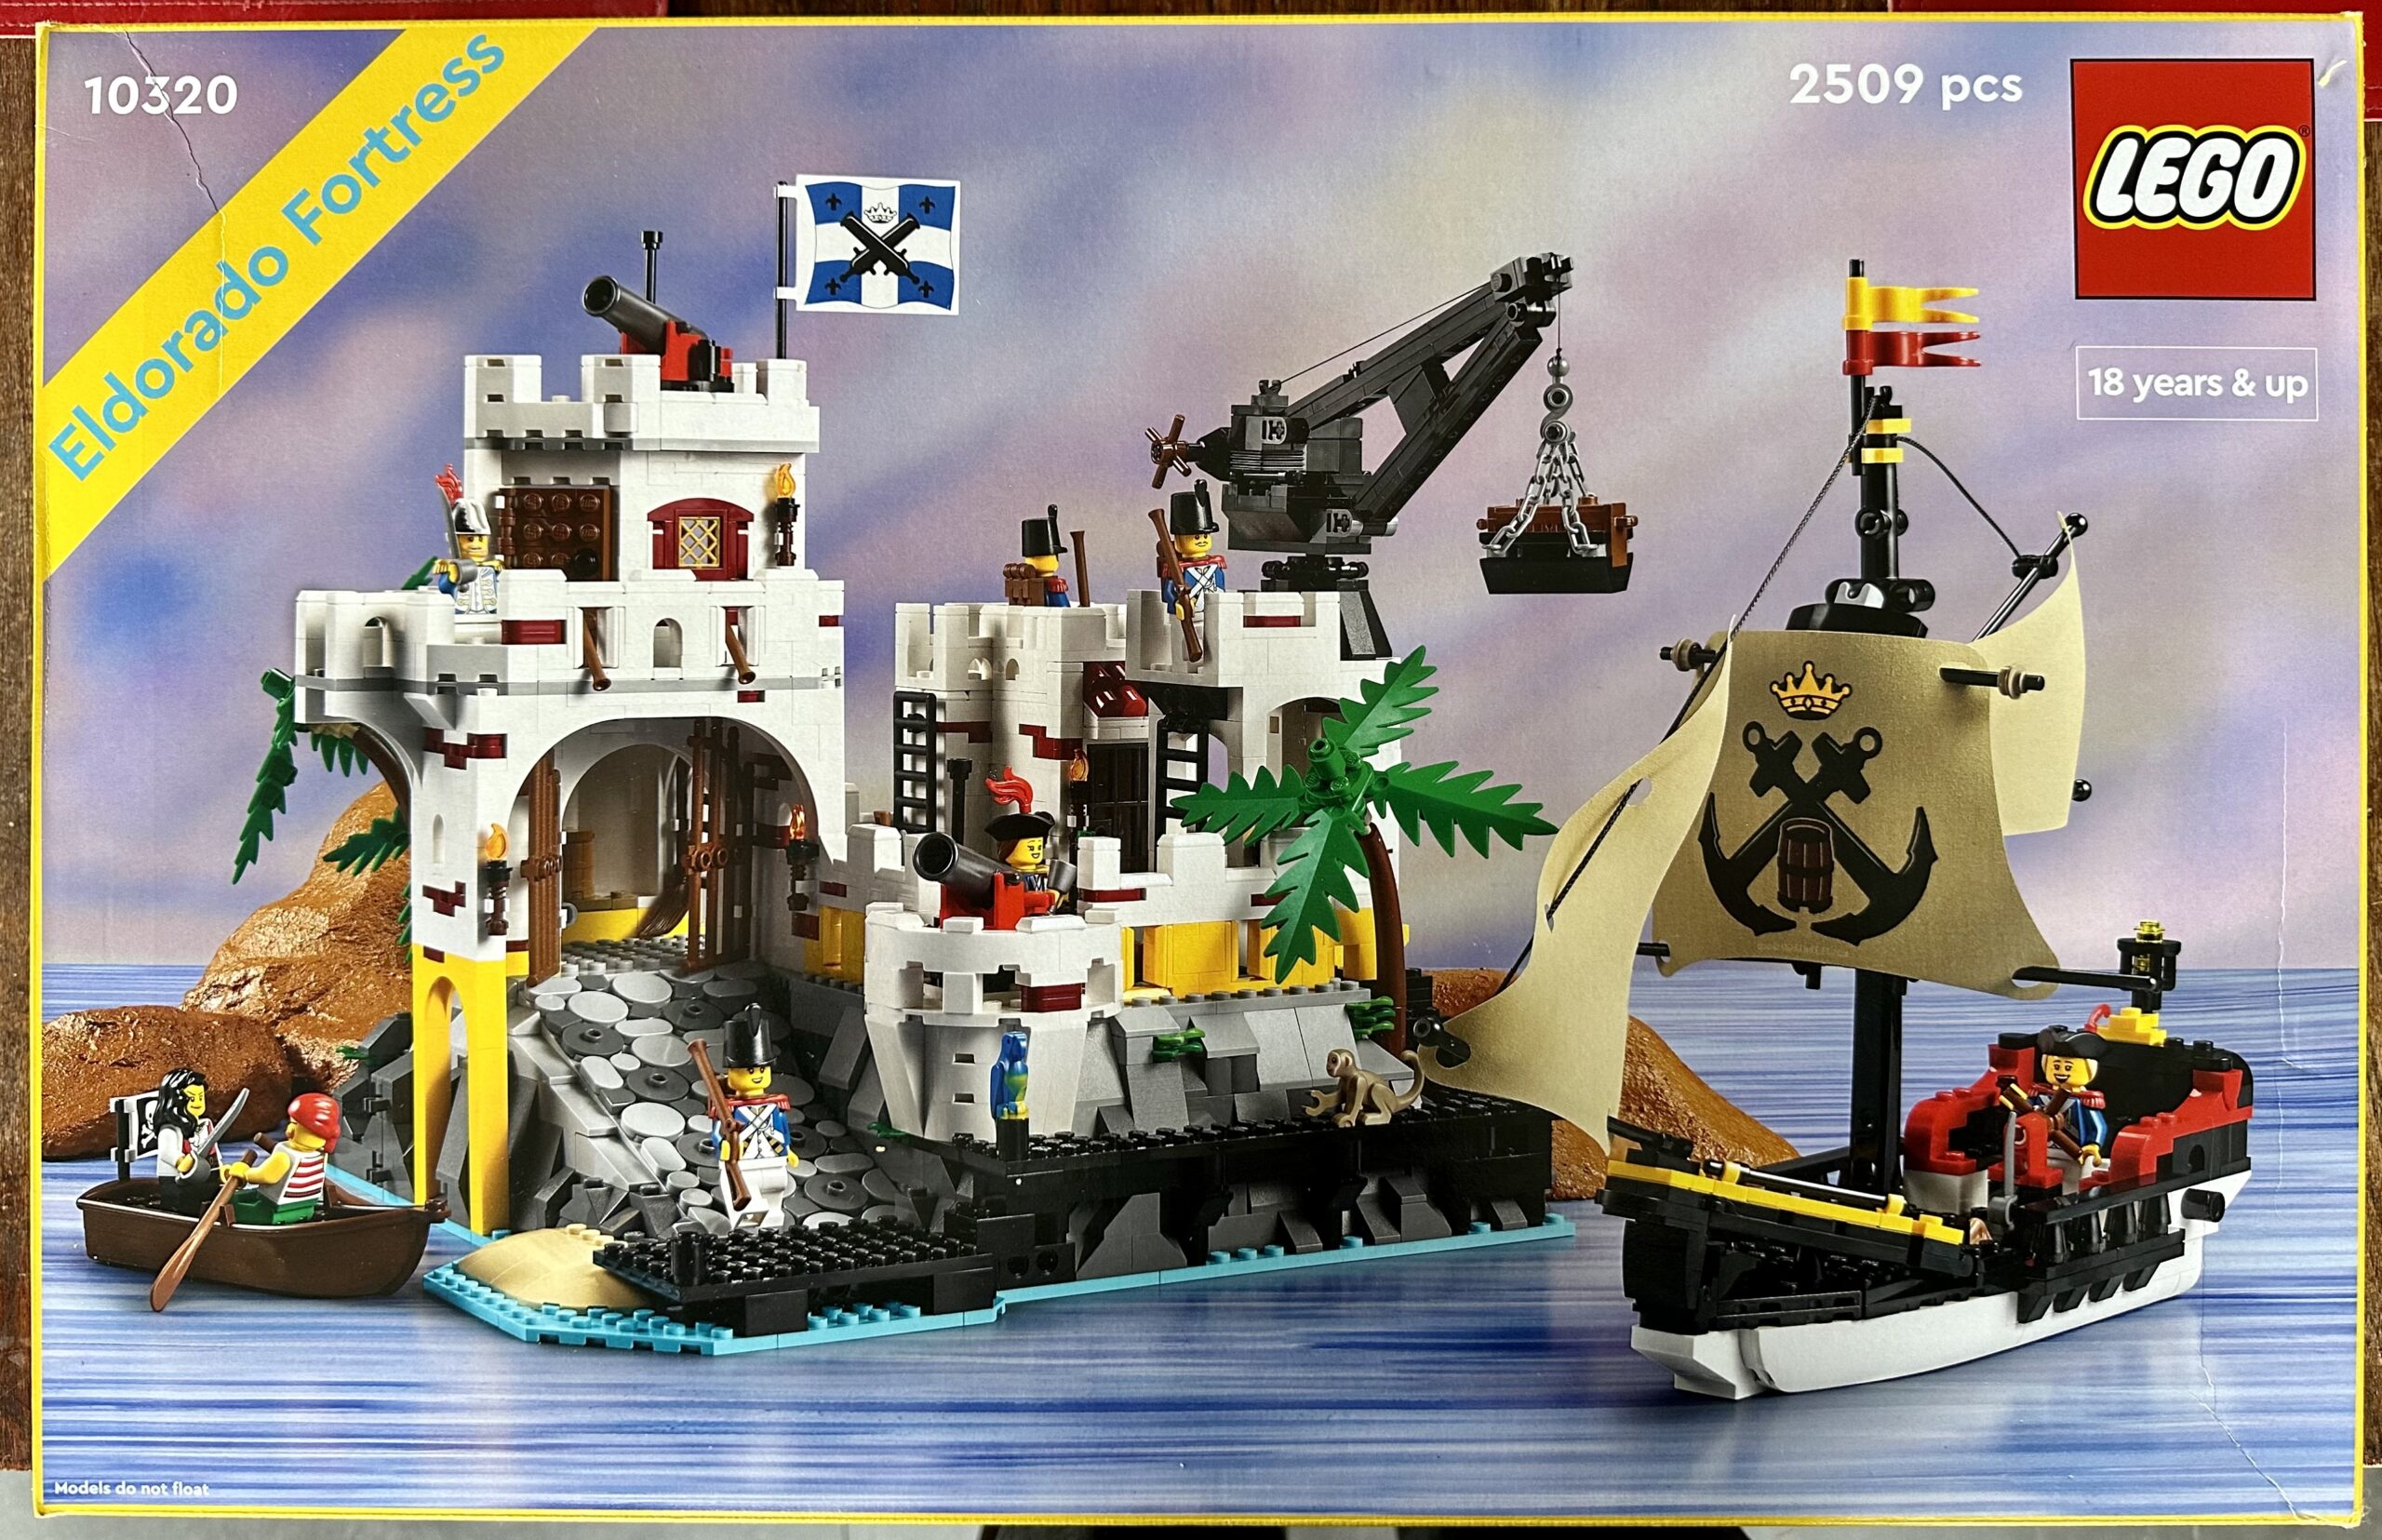 Box of LEGO set 10320 Eldorado Fortress from 2023. The box art shows an island fortress manned by soldiers, a small cutter, and a rowboat with a pair of pirates.